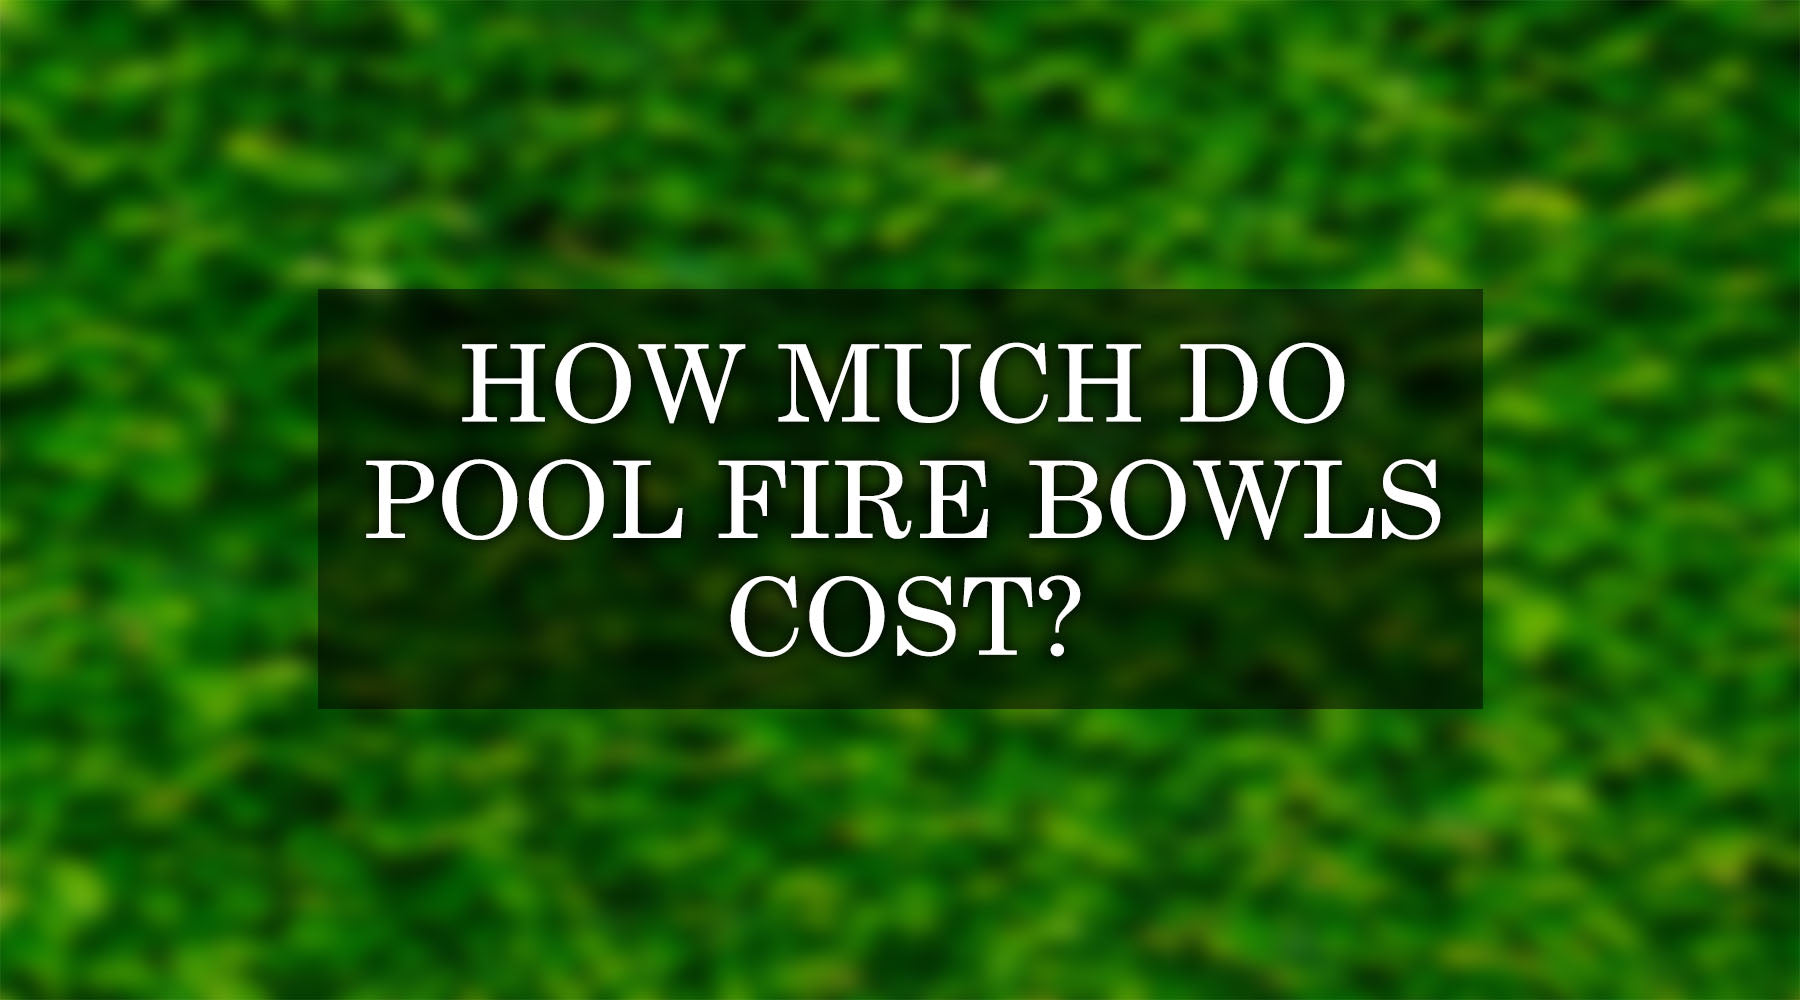 How Much Do Pool Fire Bowls Cost?